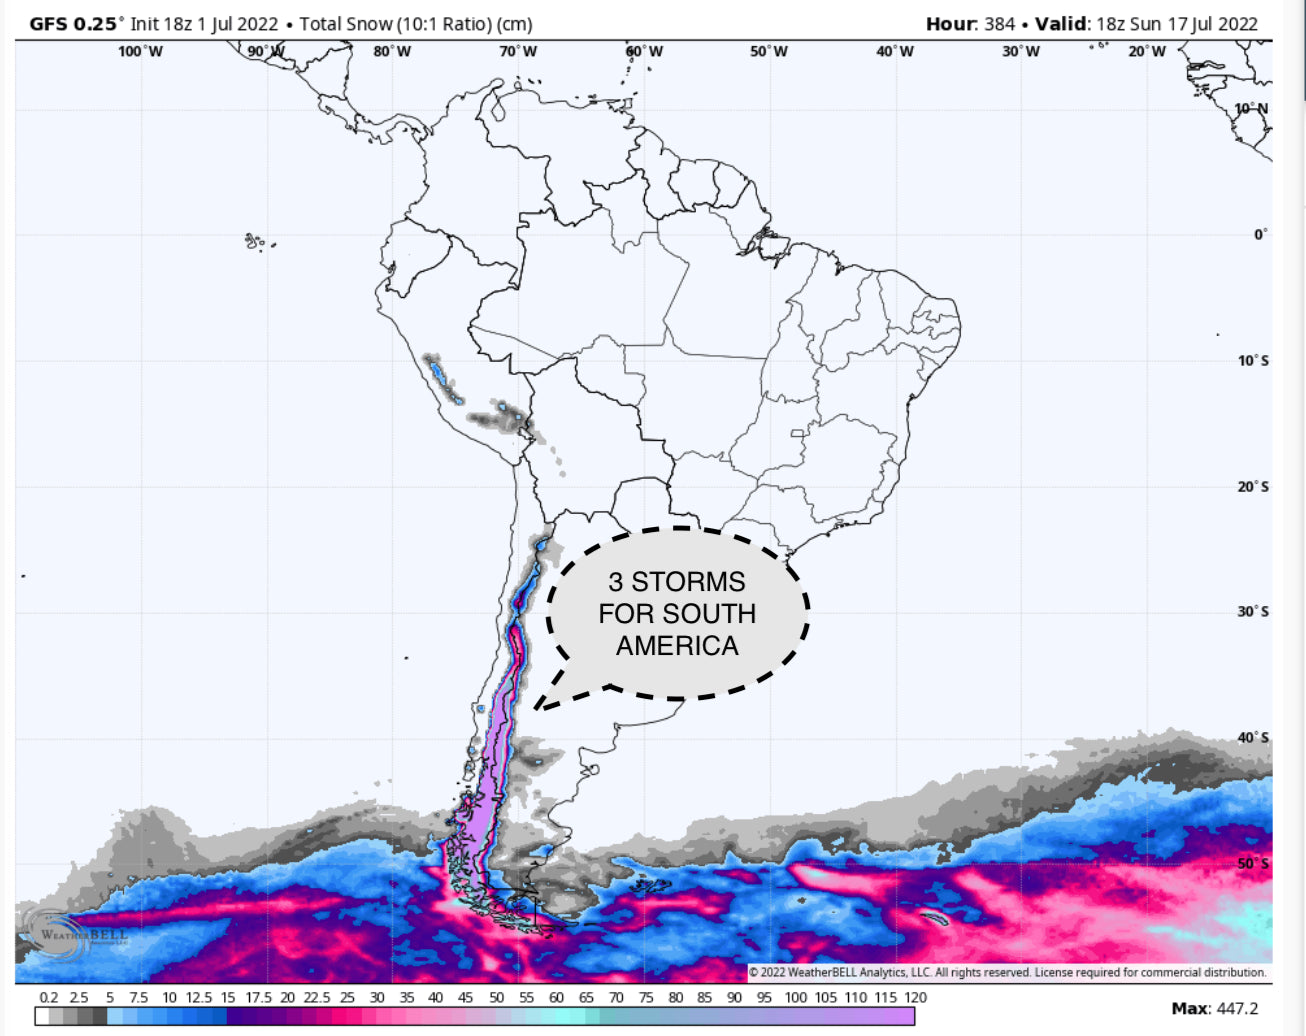 EPIC ALERT- South America is about to get slammed 4-7 feet of POW